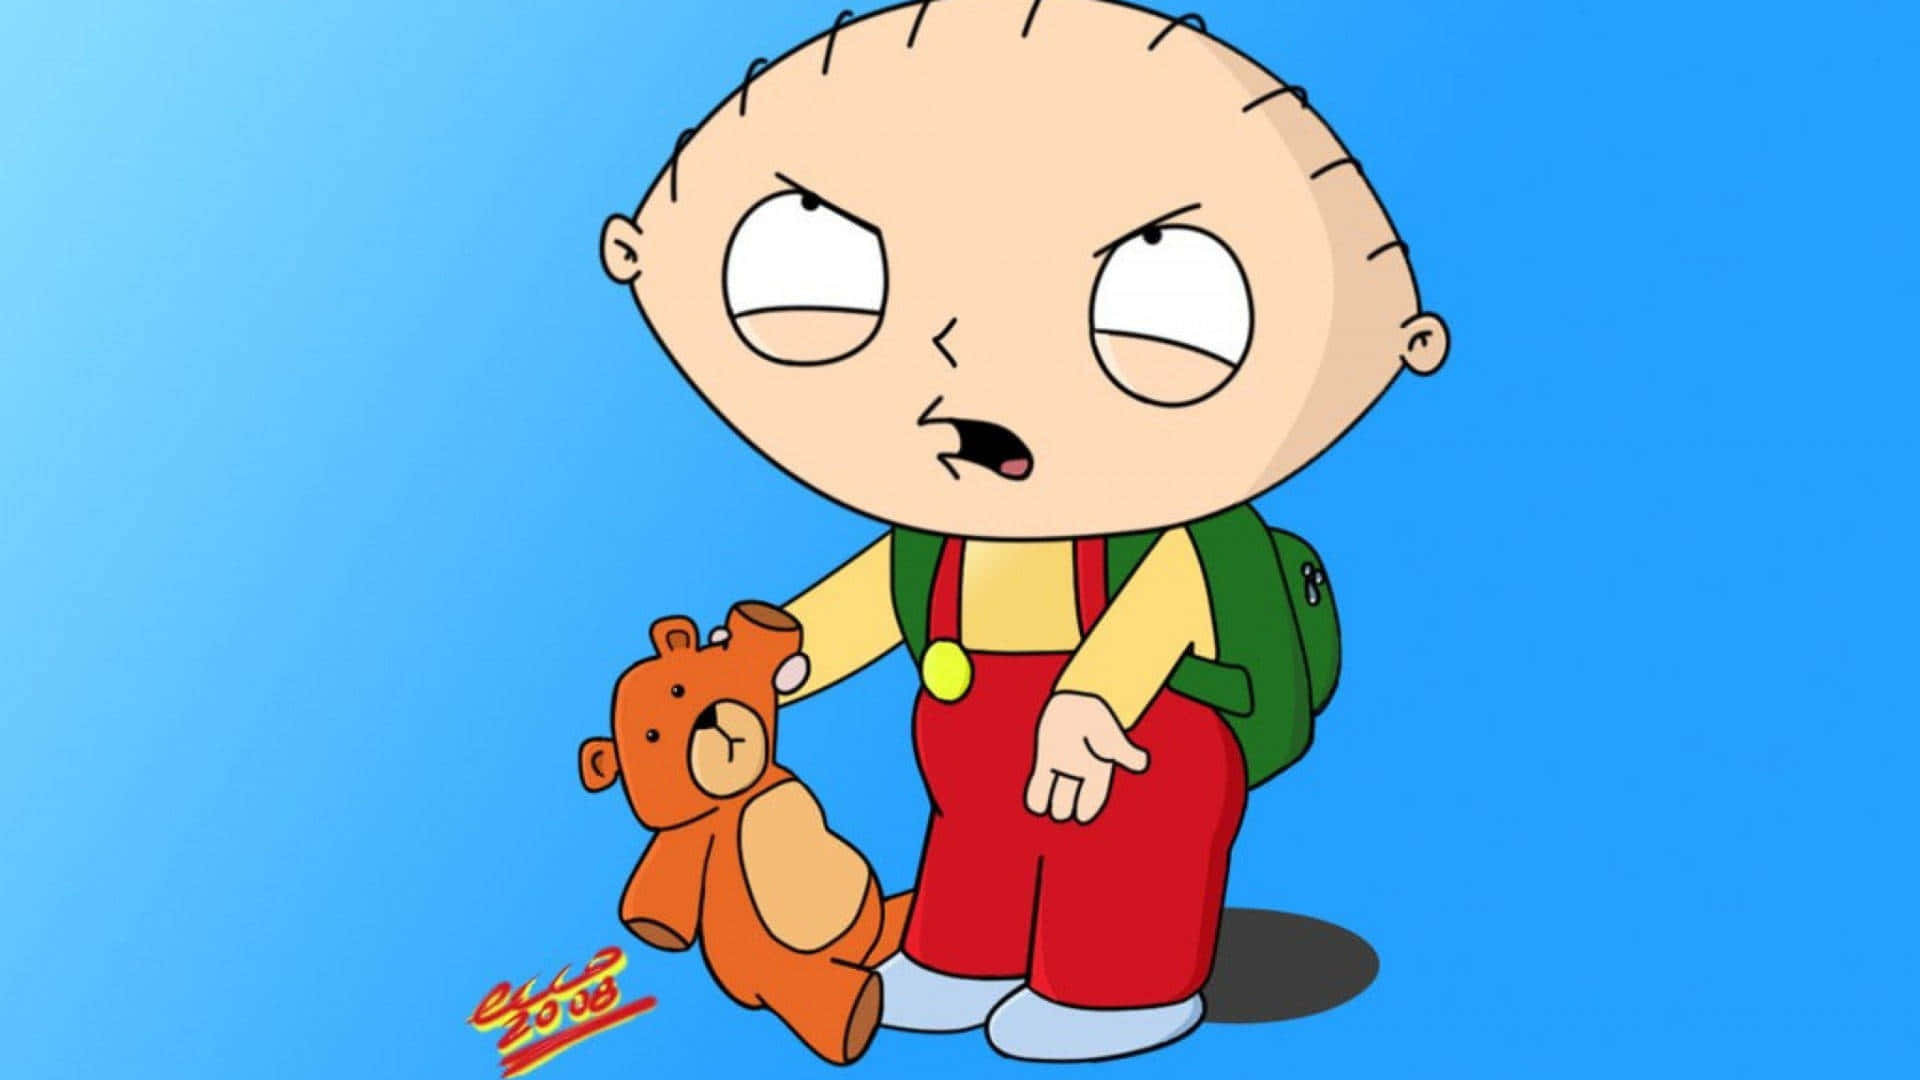 Stewie has a plan for world domination